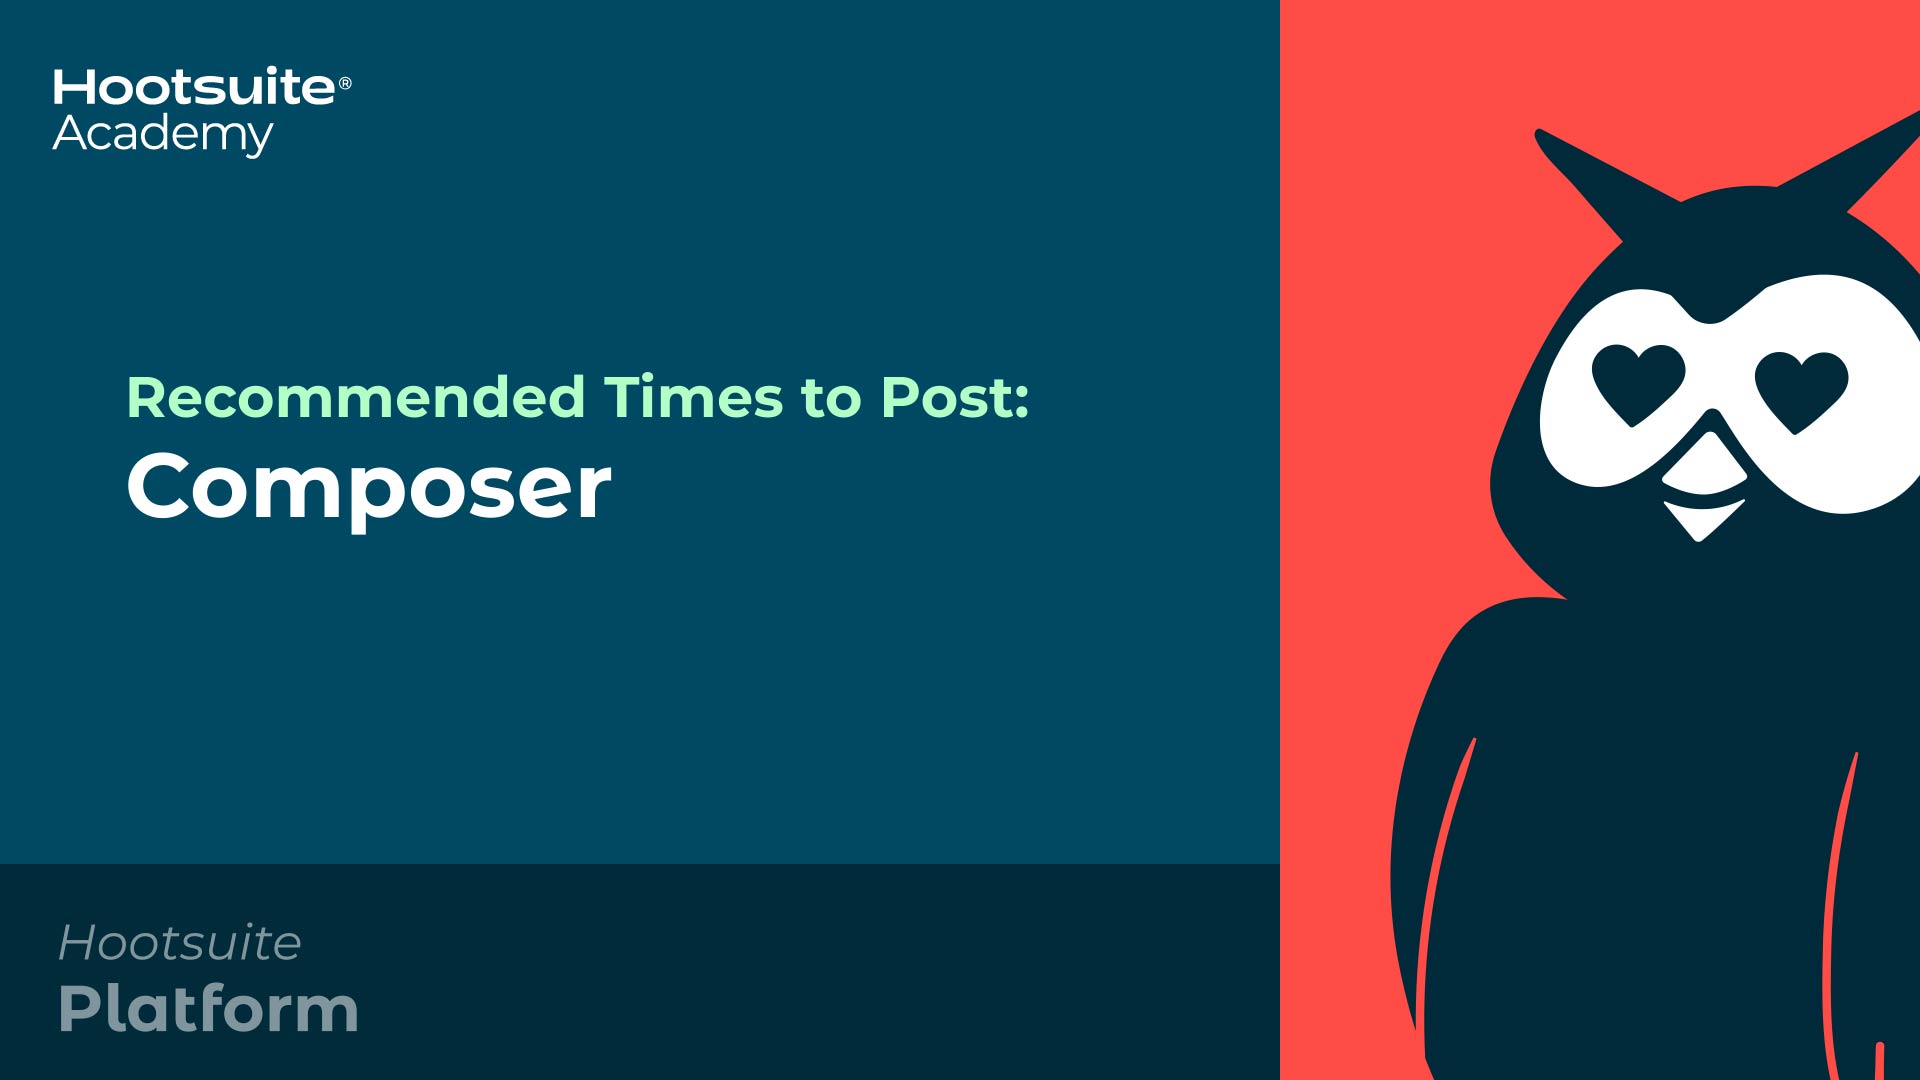 Video: Recommended times to post in Composer